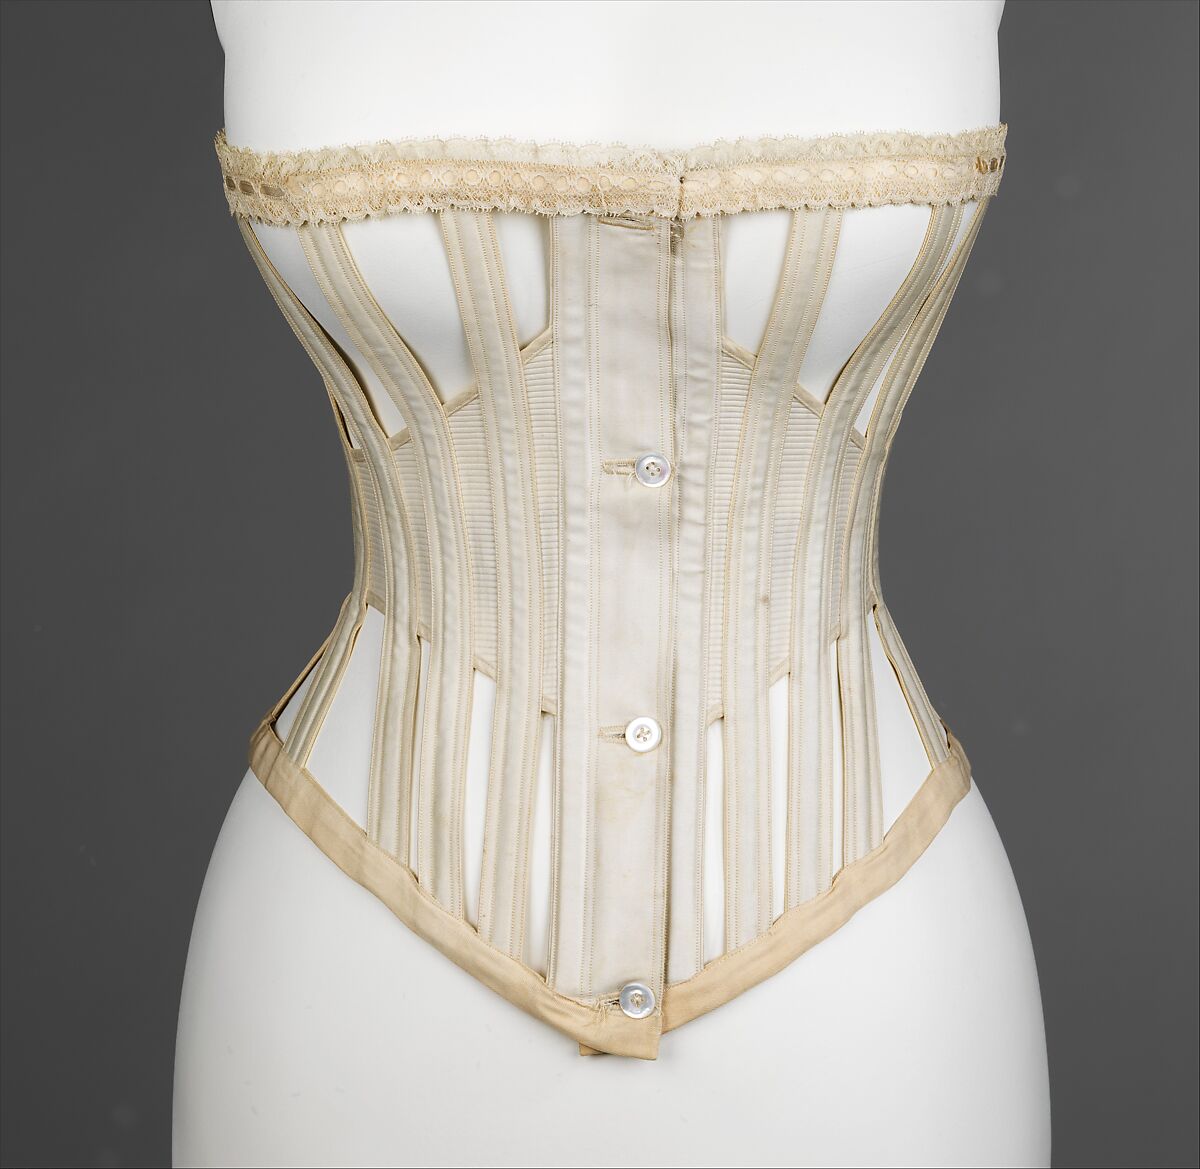 Attributed to Royal Worcester Corset Company, Corset, probably American